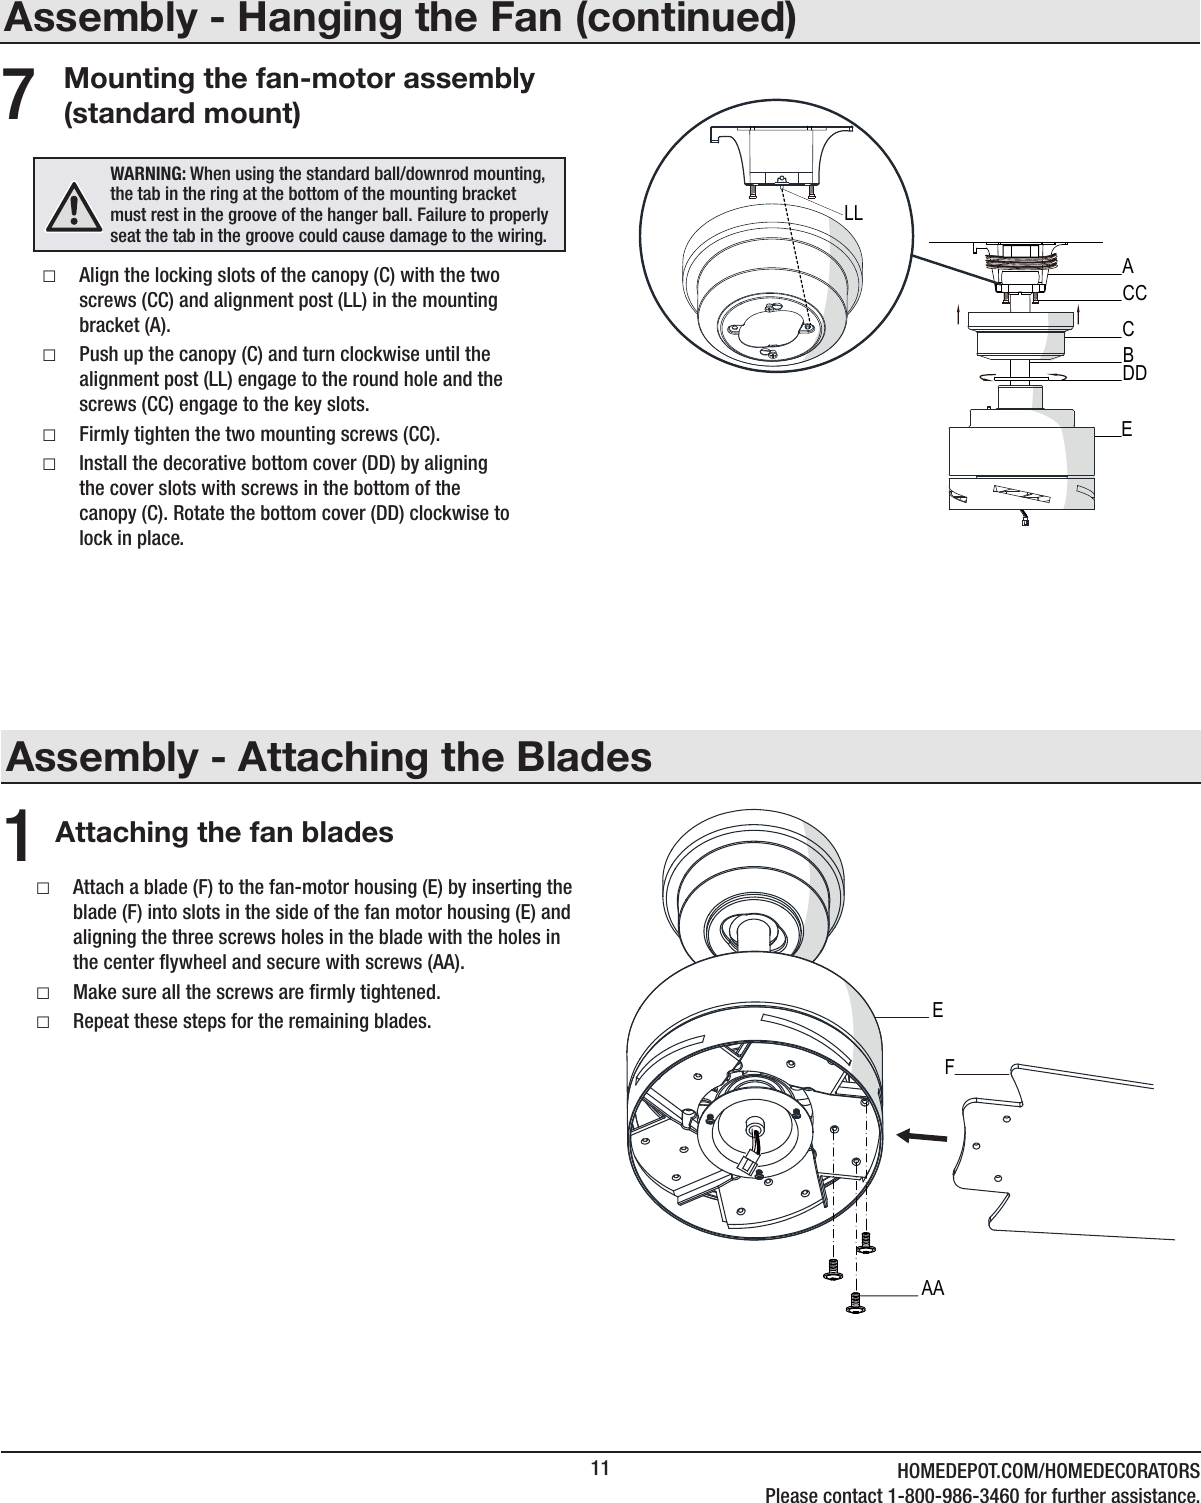 11 HOMEDEPOT.COM/HOMEDECORATORSPlease contact 1-800-986-3460 for further assistance.Assembly - Attaching the BladesAttaching the fan blades1 □Attach a blade (F) to the fan-motor housing (E) by inserting the blade (F) into slots in the side of the fan motor housing (E) and aligning the three screws holes in the blade with the holes in the center ywheel and secure with screws (AA). □Make sure all the screws are rmly tightened. □Repeat these steps for the remaining blades.Assembly - Hanging the Fan (continued)Mounting the fan-motor assembly (standard mount) □Align the locking slots of the canopy (C) with the two screws (CC) and alignment post (LL) in the mounting bracket (A). □Push up the canopy (C) and turn clockwise until the alignment post (LL) engage to the round hole and the screws (CC) engage to the key slots. □Firmly tighten the two mounting screws (CC). □Install the decorative bottom cover (DD) by aligning the cover slots with screws in the bottom of the canopy (C). Rotate the bottom cover (DD) clockwise to lock in place.7WARNING: When using the standard ball/downrod mounting, the tab in the ring at the bottom of the mounting bracket must rest in the groove of the hanger ball. Failure to properly seat the tab in the groove could cause damage to the wiring.CACCDDBELLAAEF